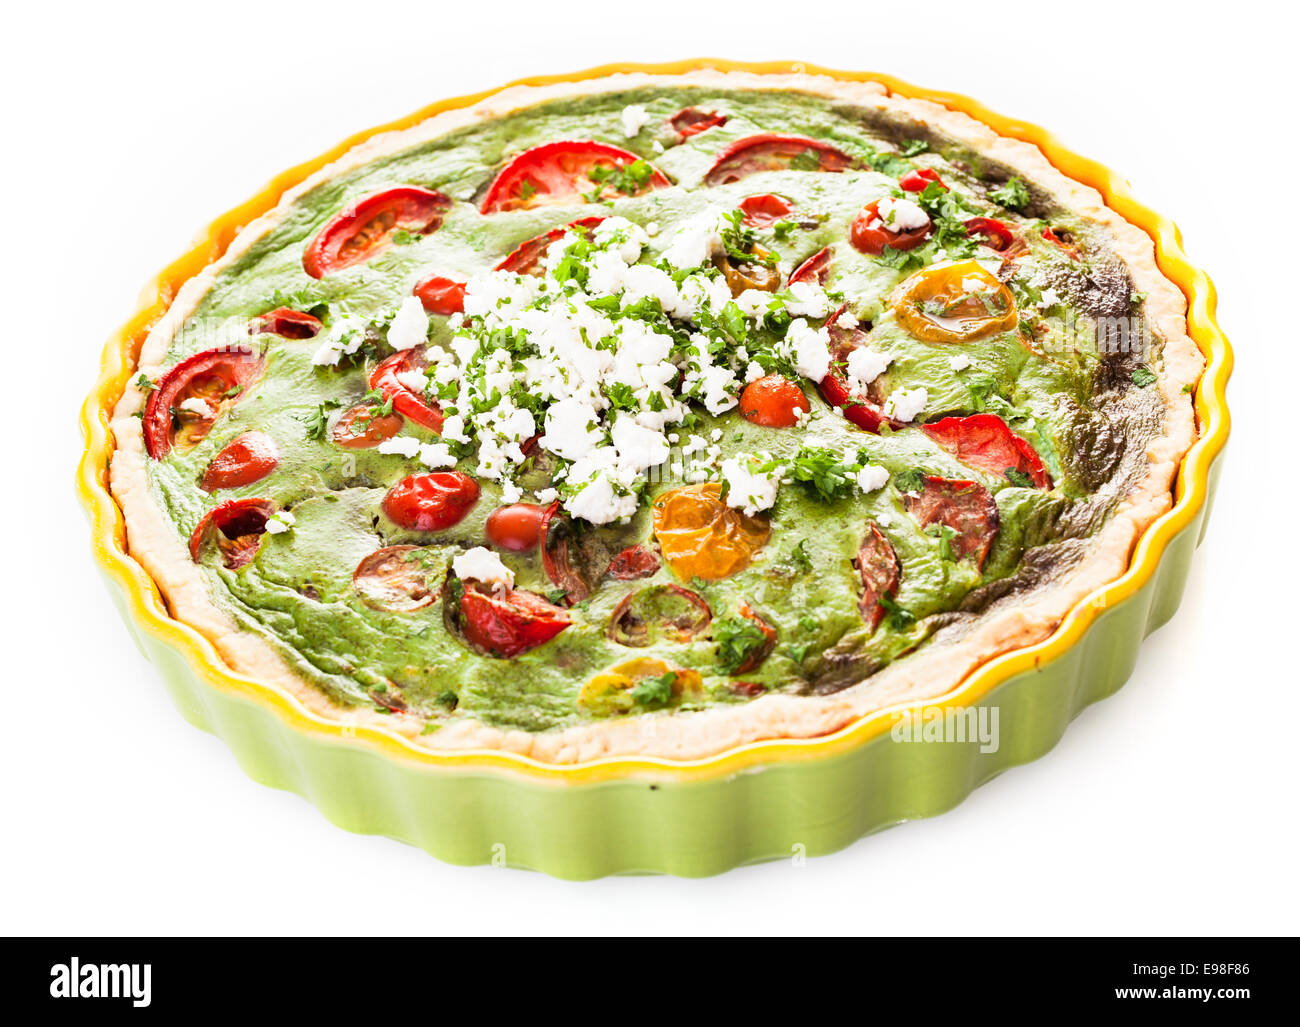 Savory egg, herb, tomato and cheese vegetarian quiche in a pastry crust served in a fluted pie dish on a white background Stock Photo